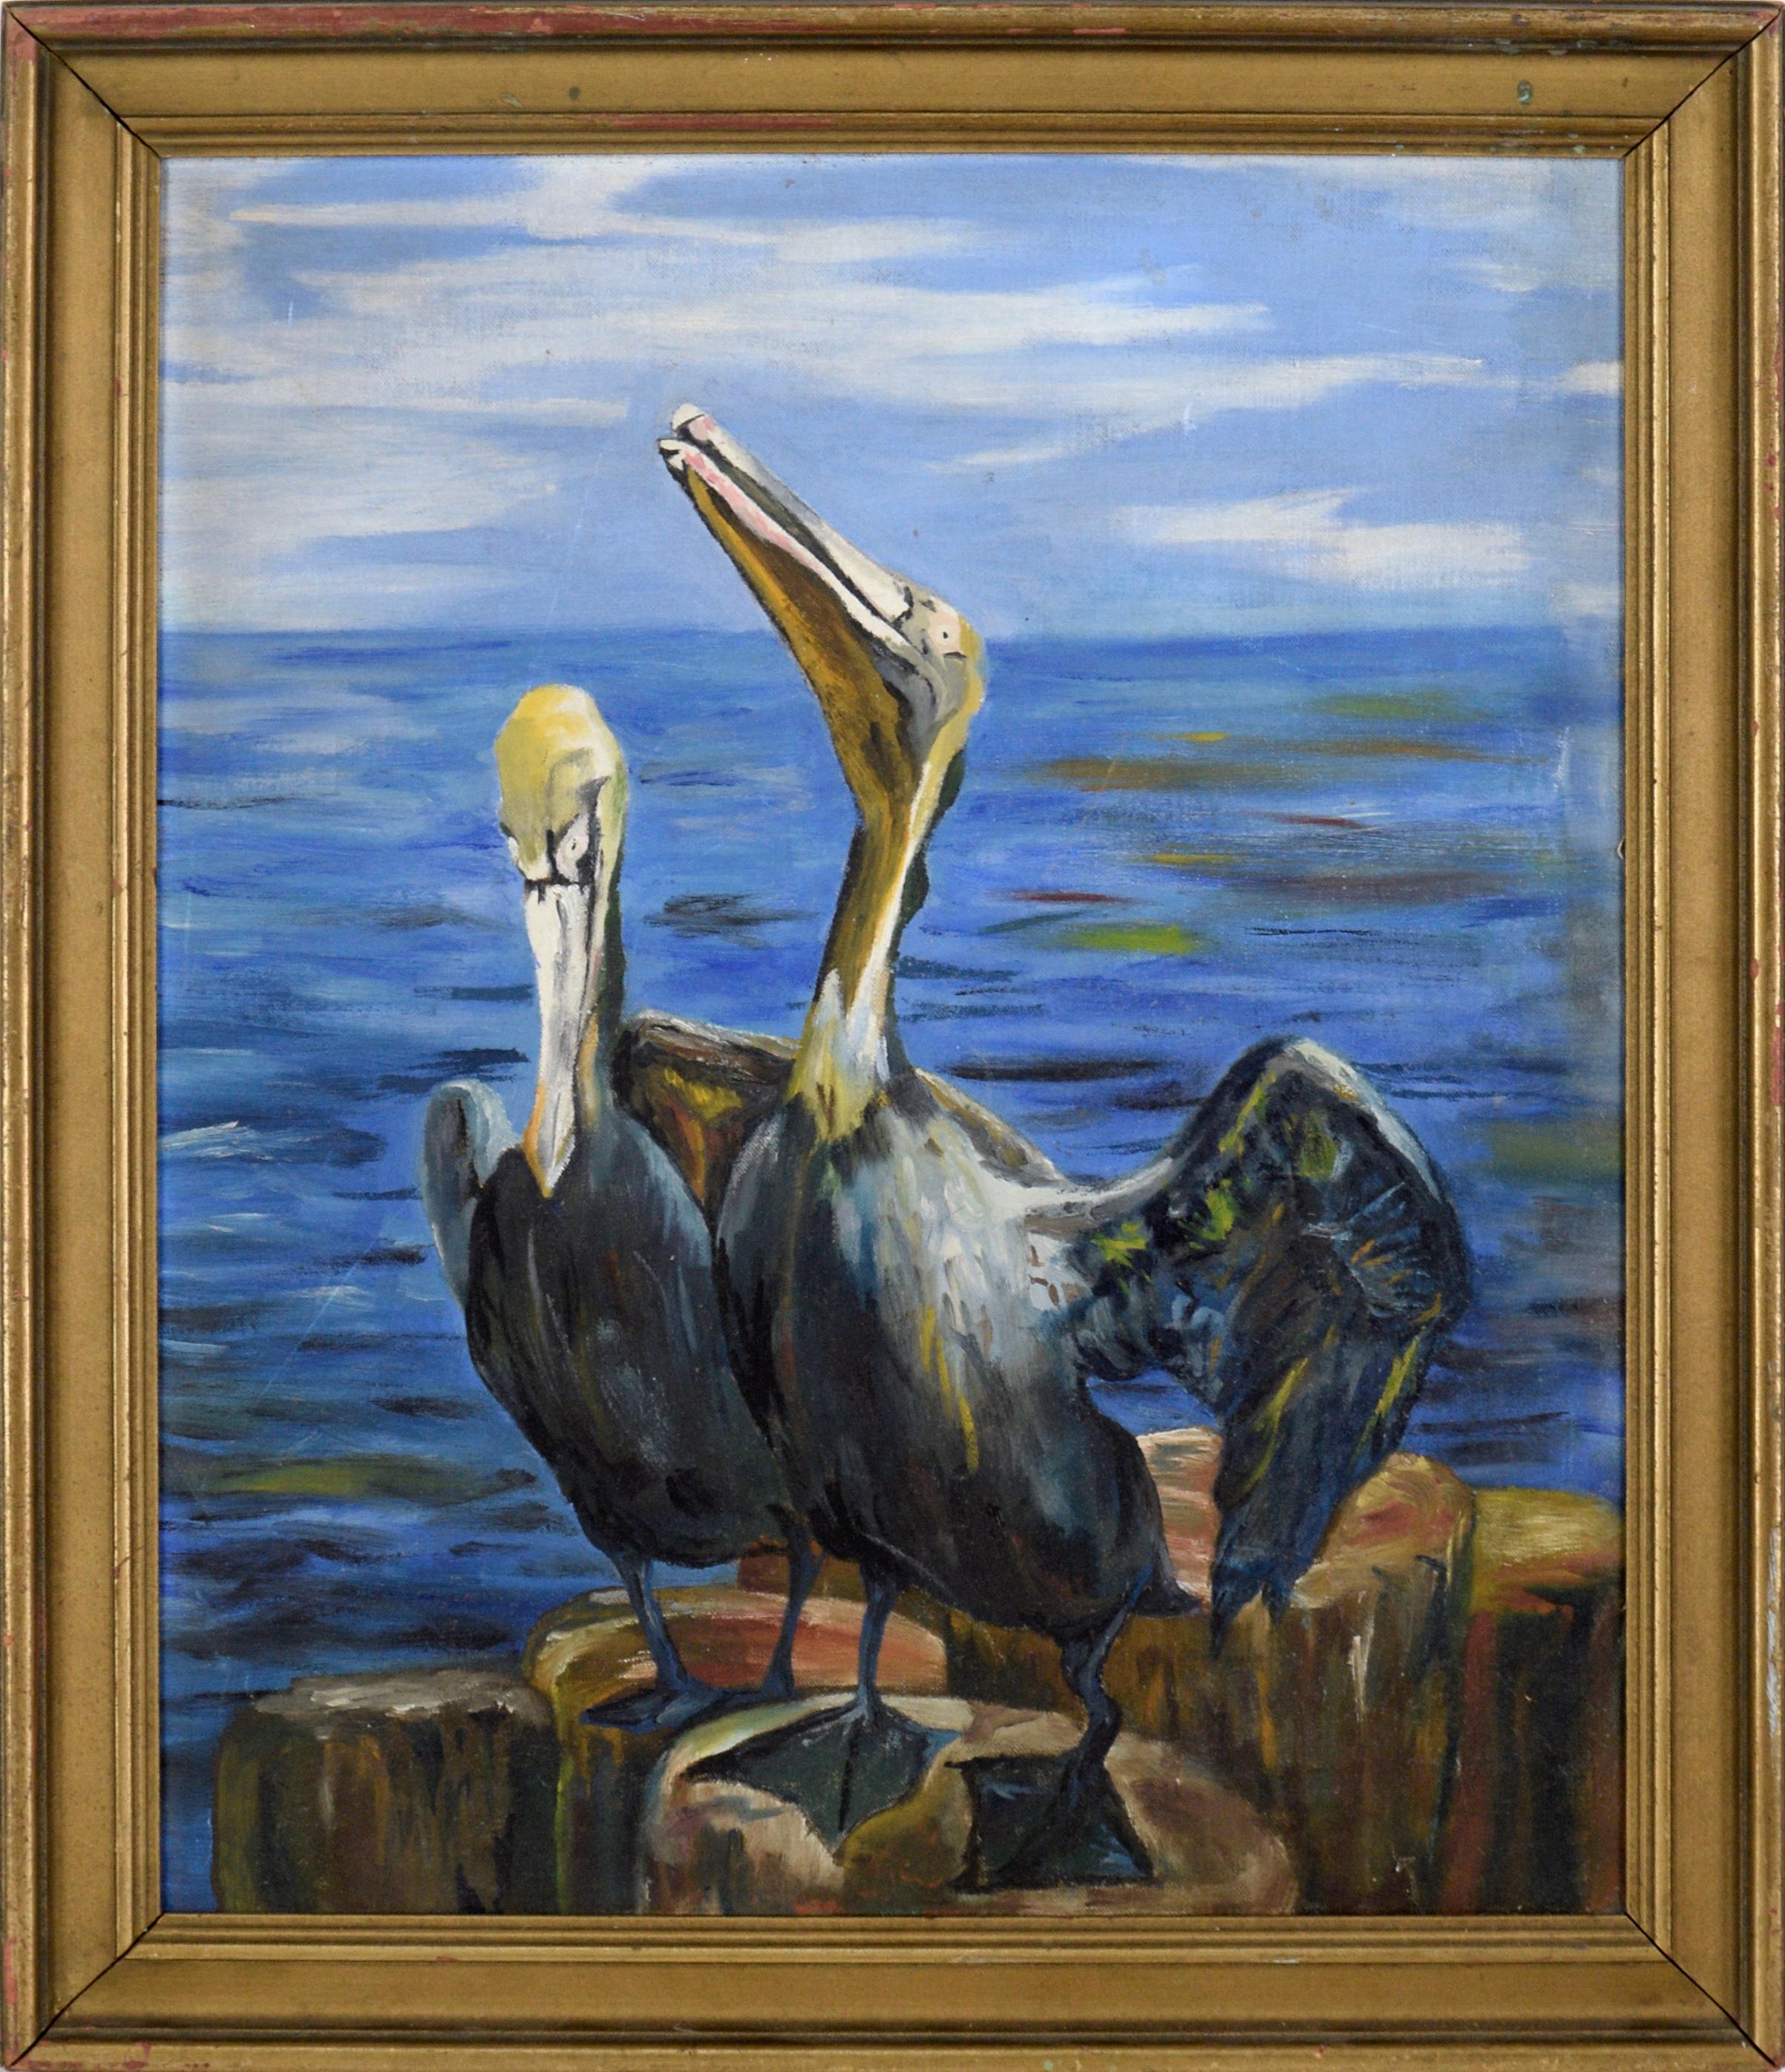 Unknown Animal Painting - Perched Pelicans by the Ocean - Oil on Canvas